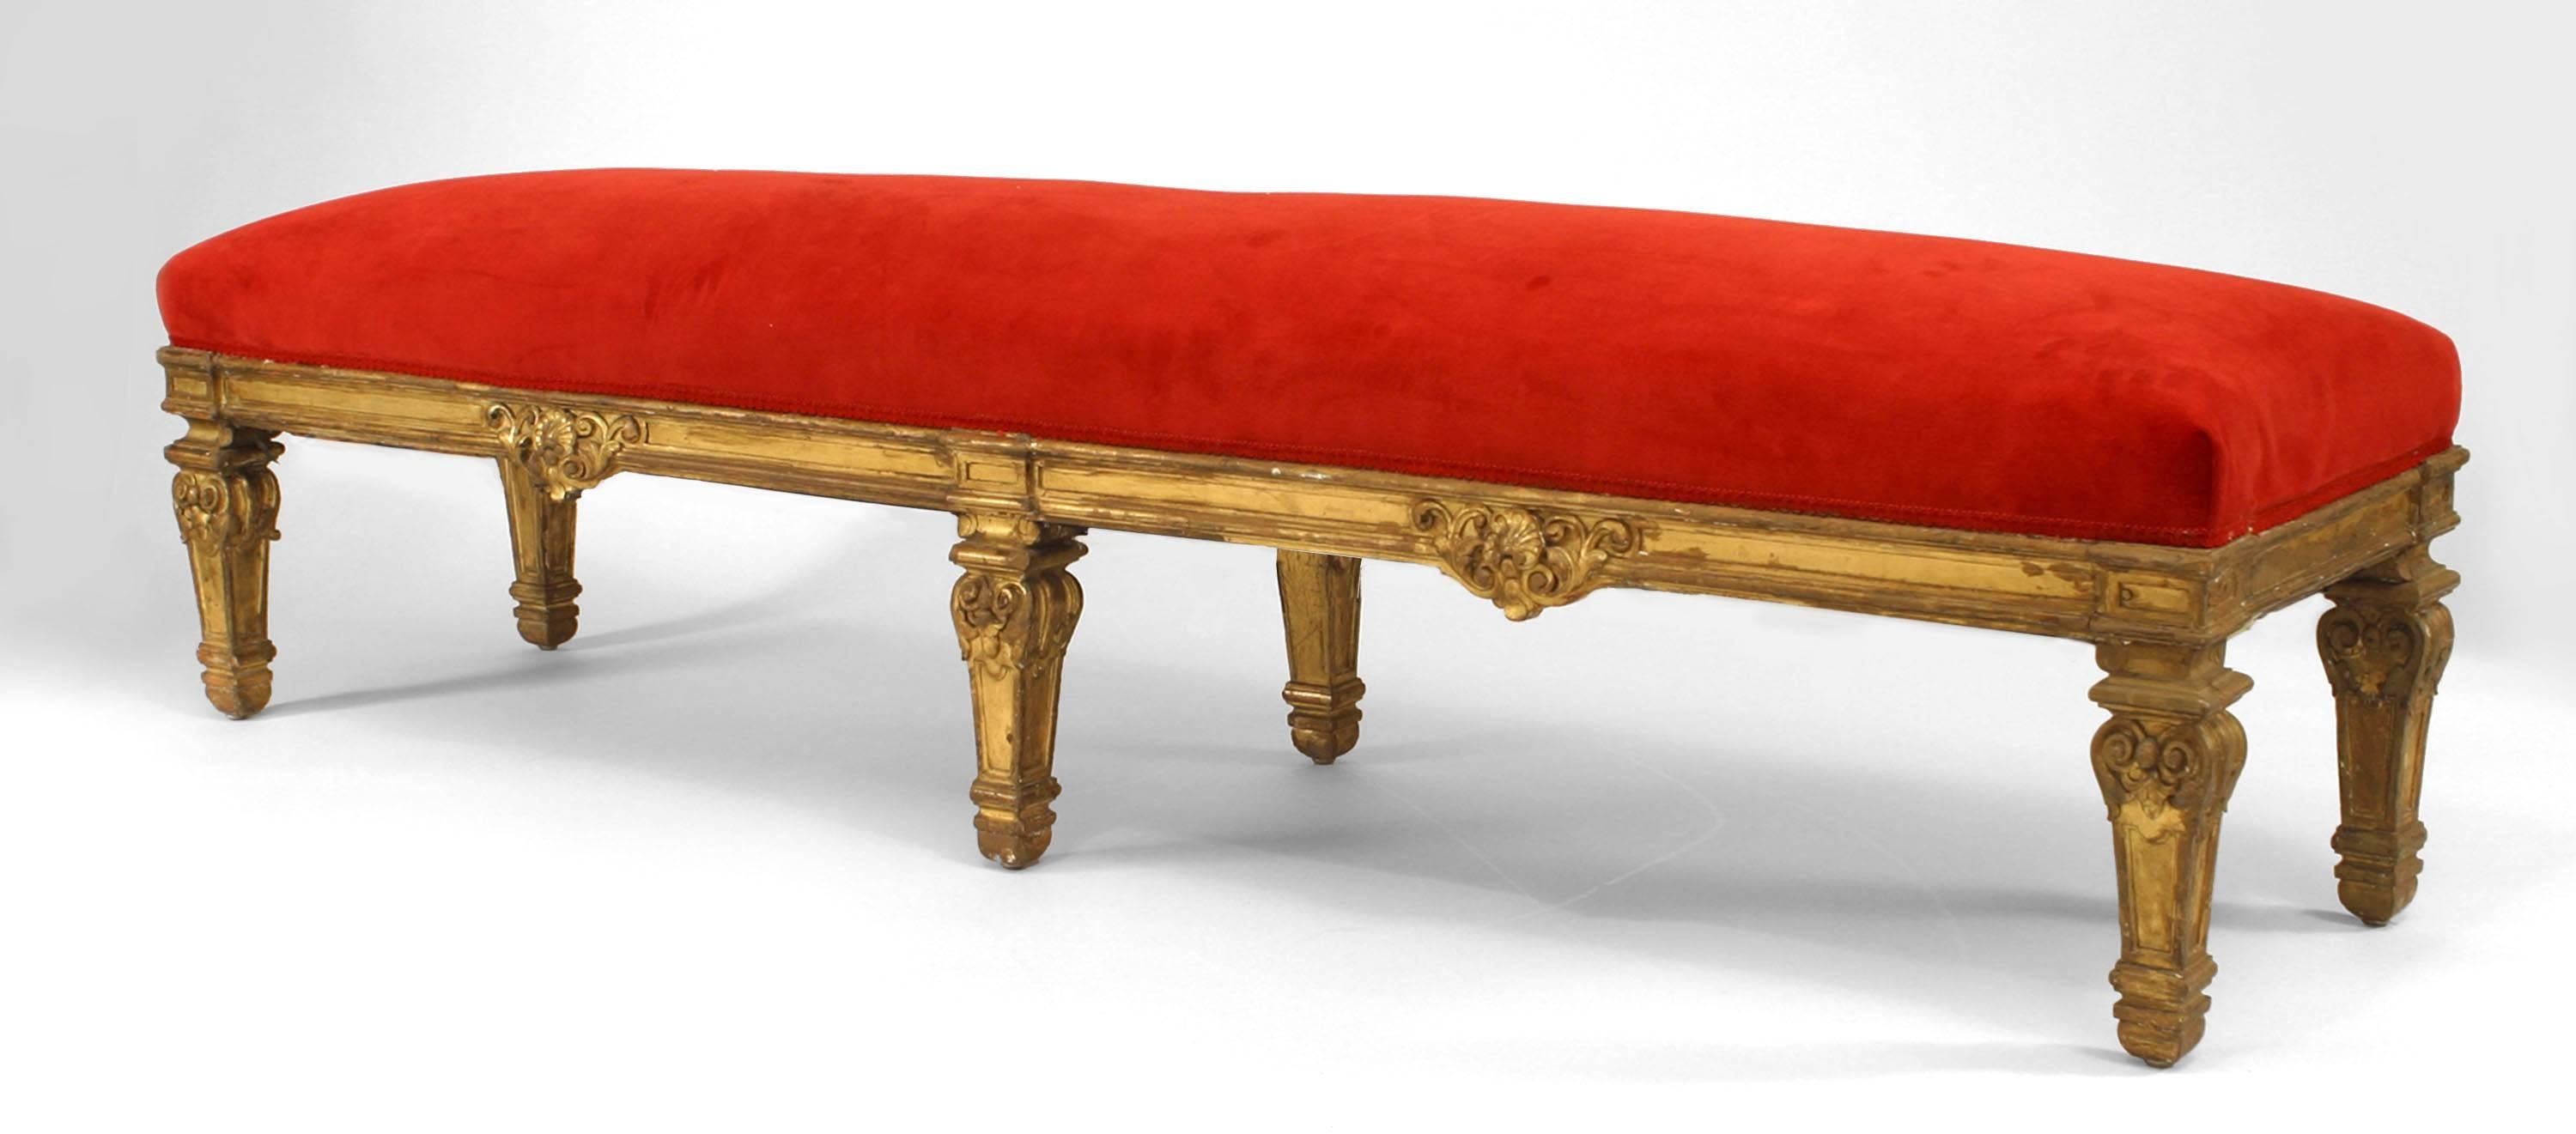 Pair of French Louis XIV style (19th Cent) carved gilt wood benches with 6 legs and red velvet upholstered seat.
